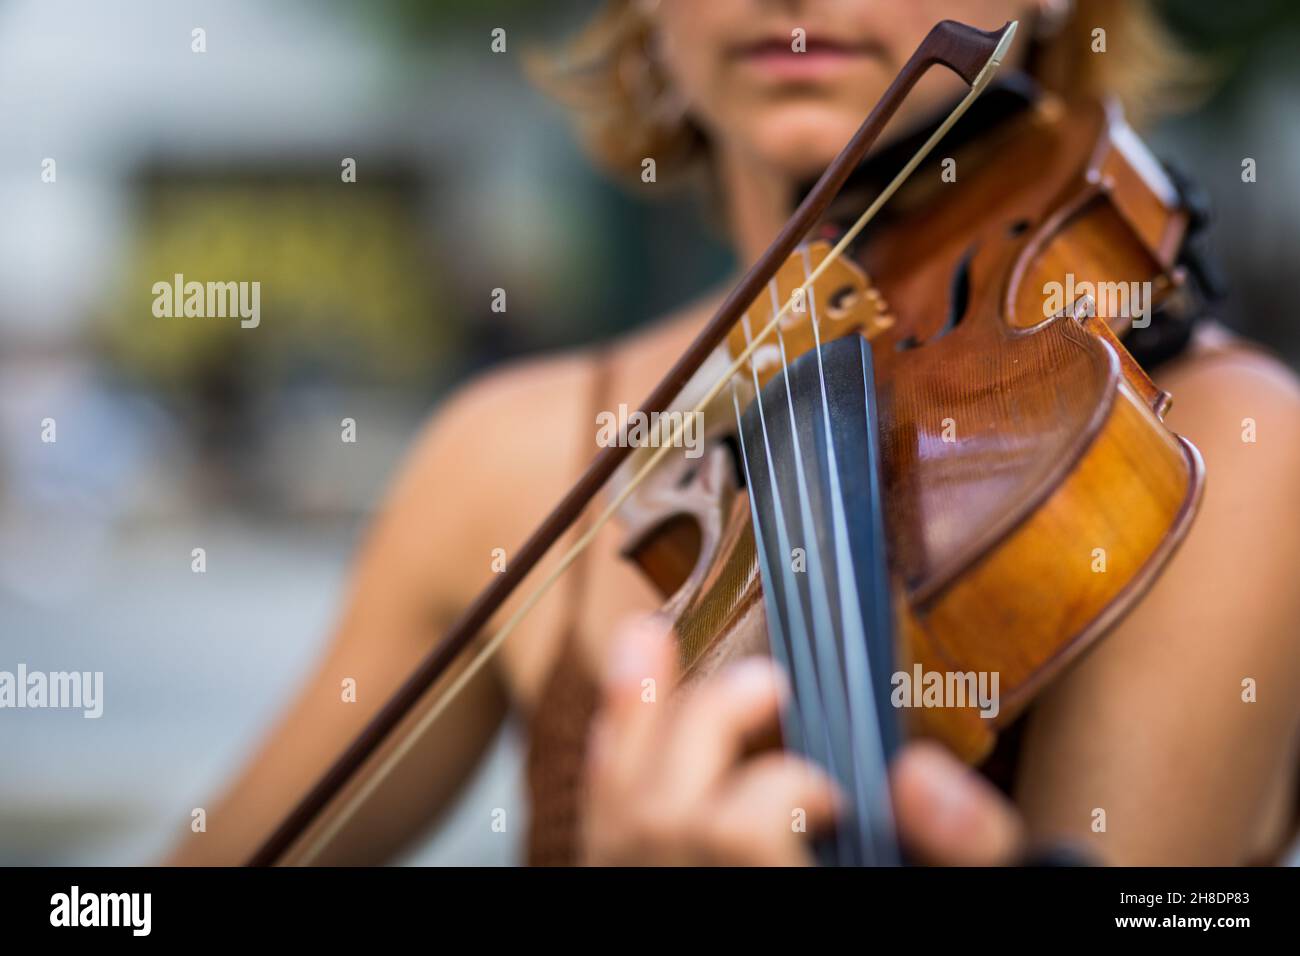 Detail of unrecognizable red-haired violinist playing the violin in the street Stock Photo